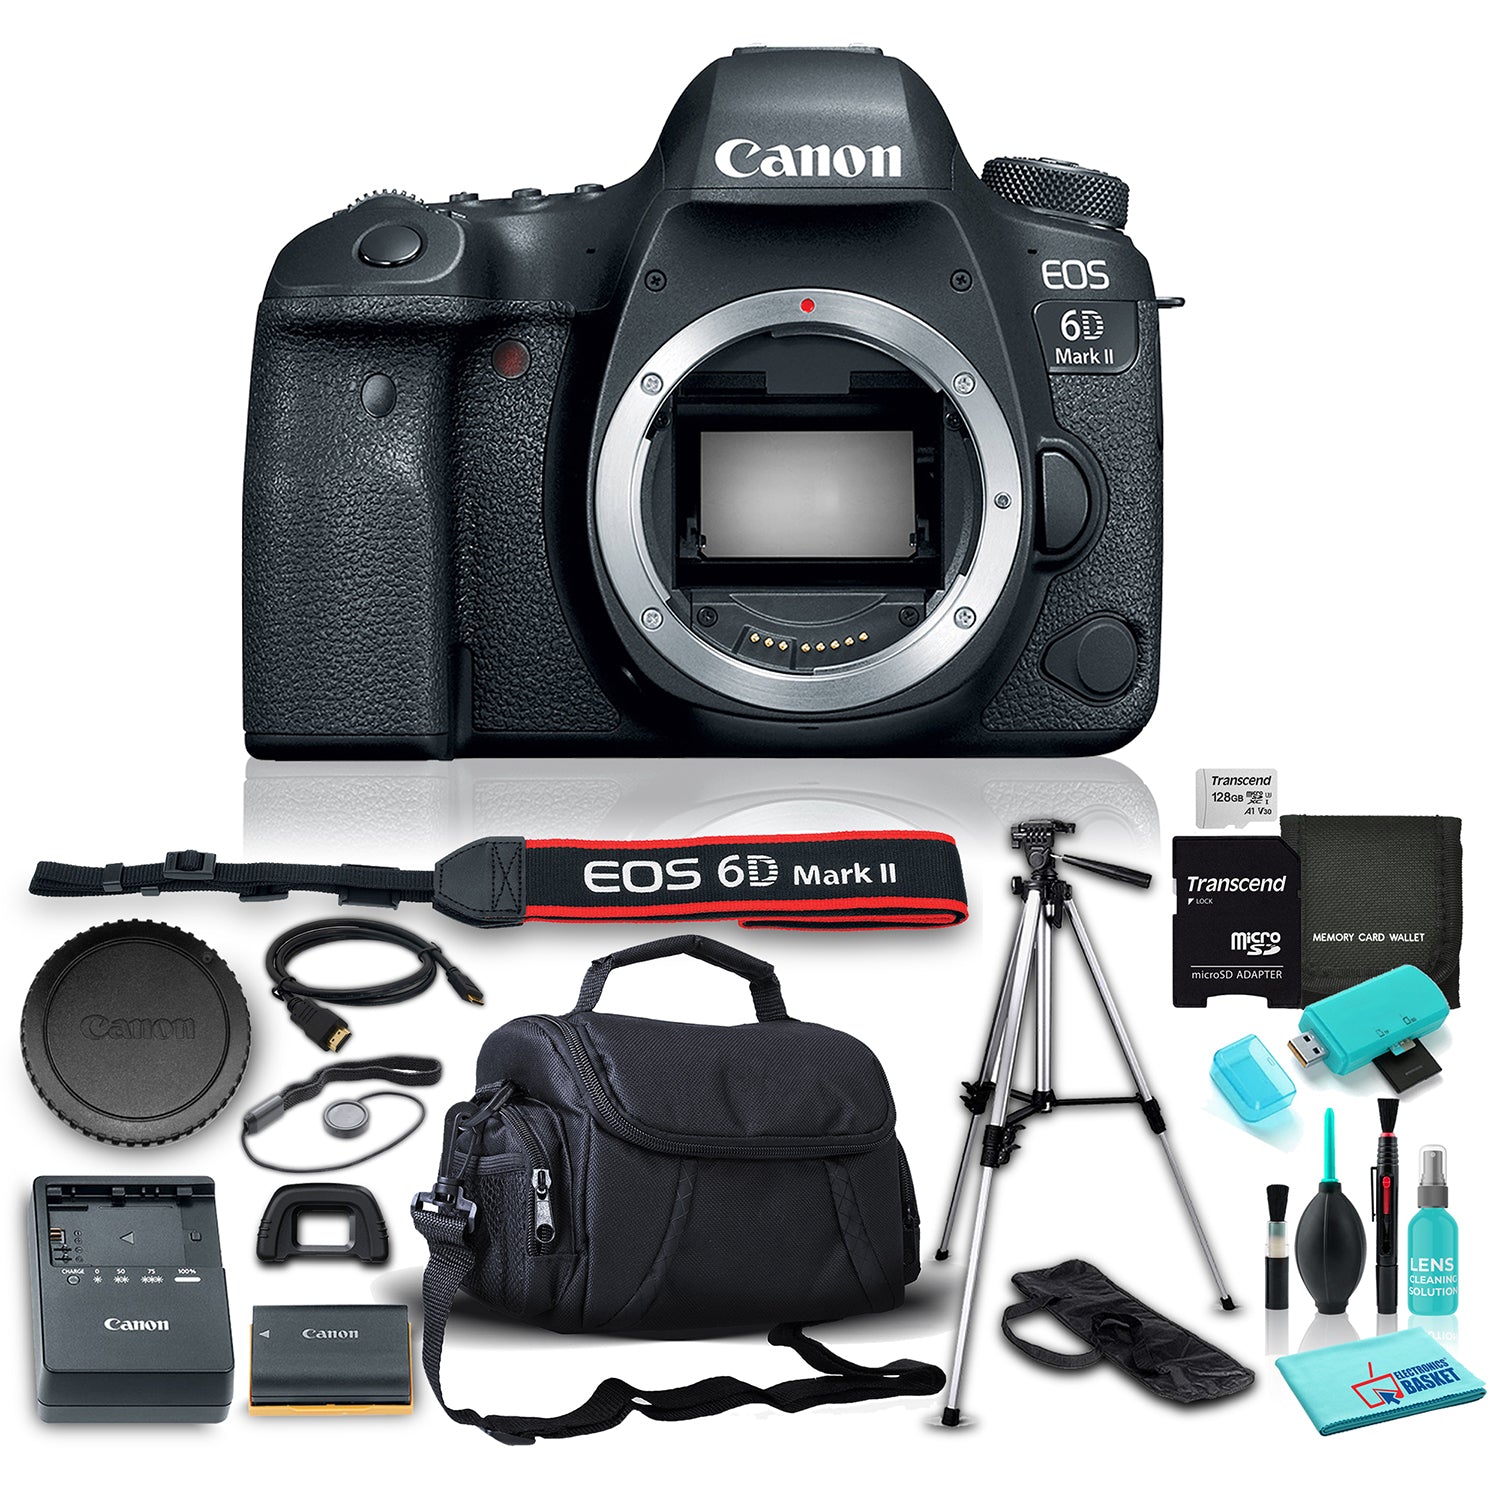 Canon EOS 6D Mark II DSLR Camera (Body Only), 45-Point All-Cross Type AF System, DIGIC 7 Image Processor w/ 8 Piece Accessories